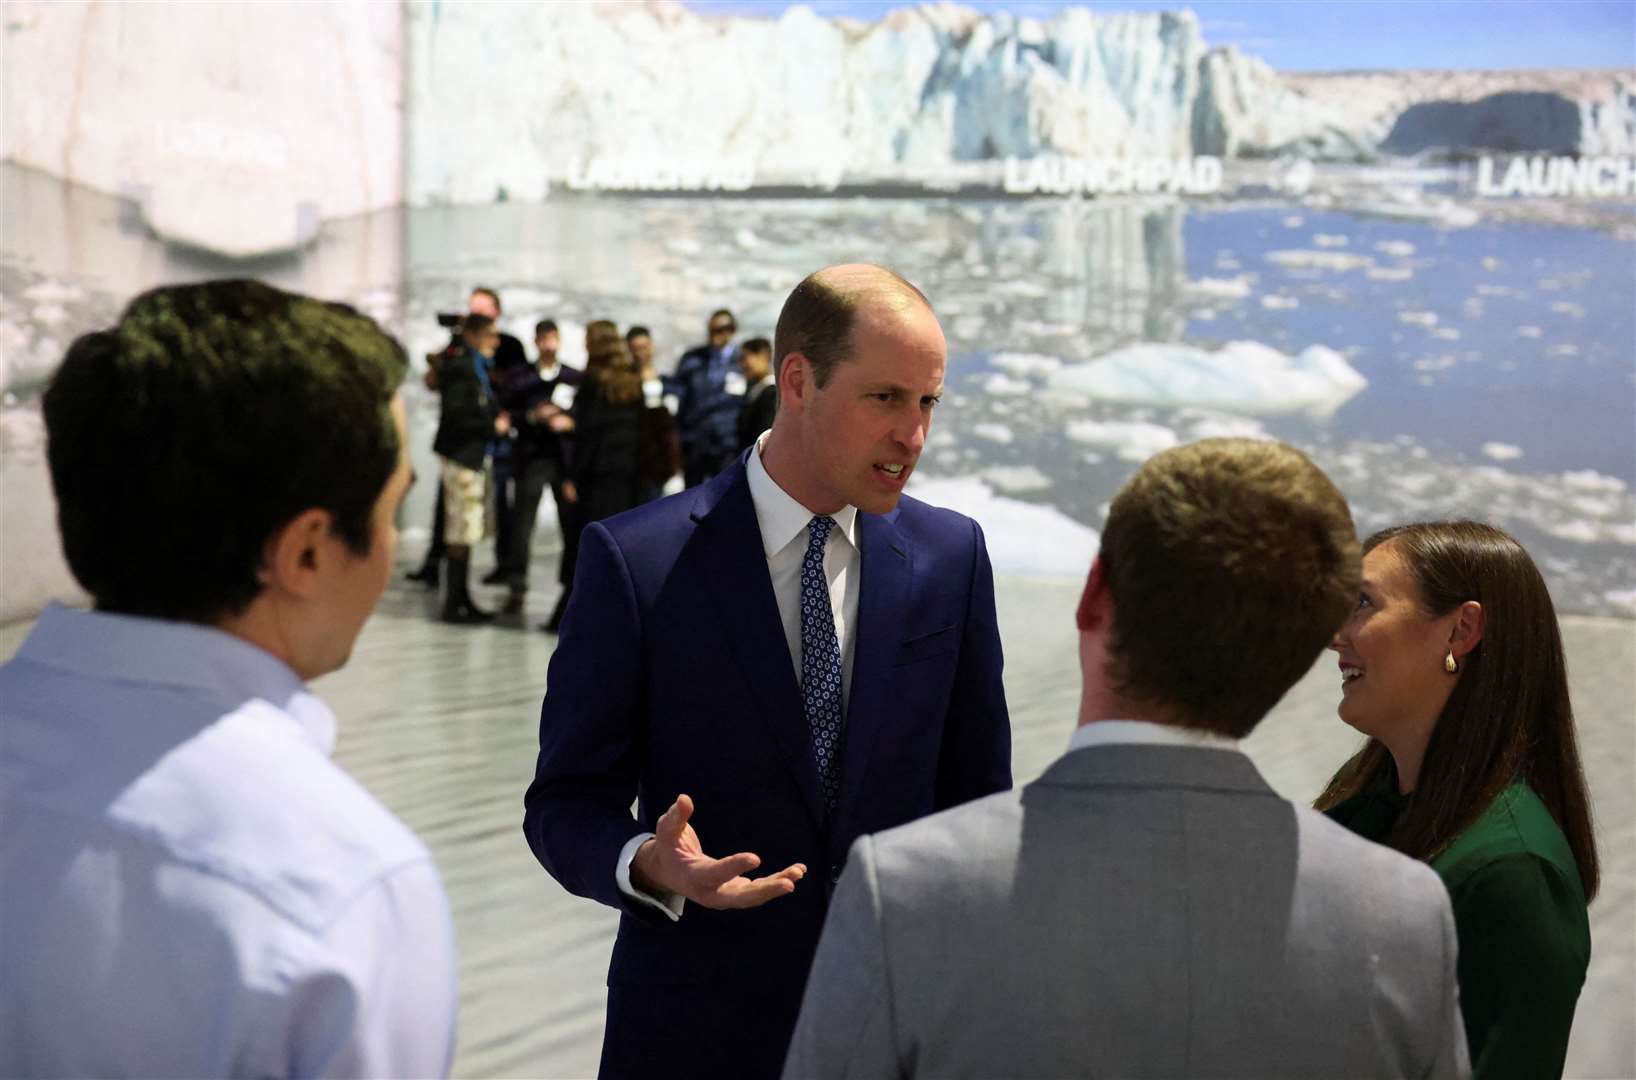 William speaking with guests at the event (Belinda Jiao/PA)